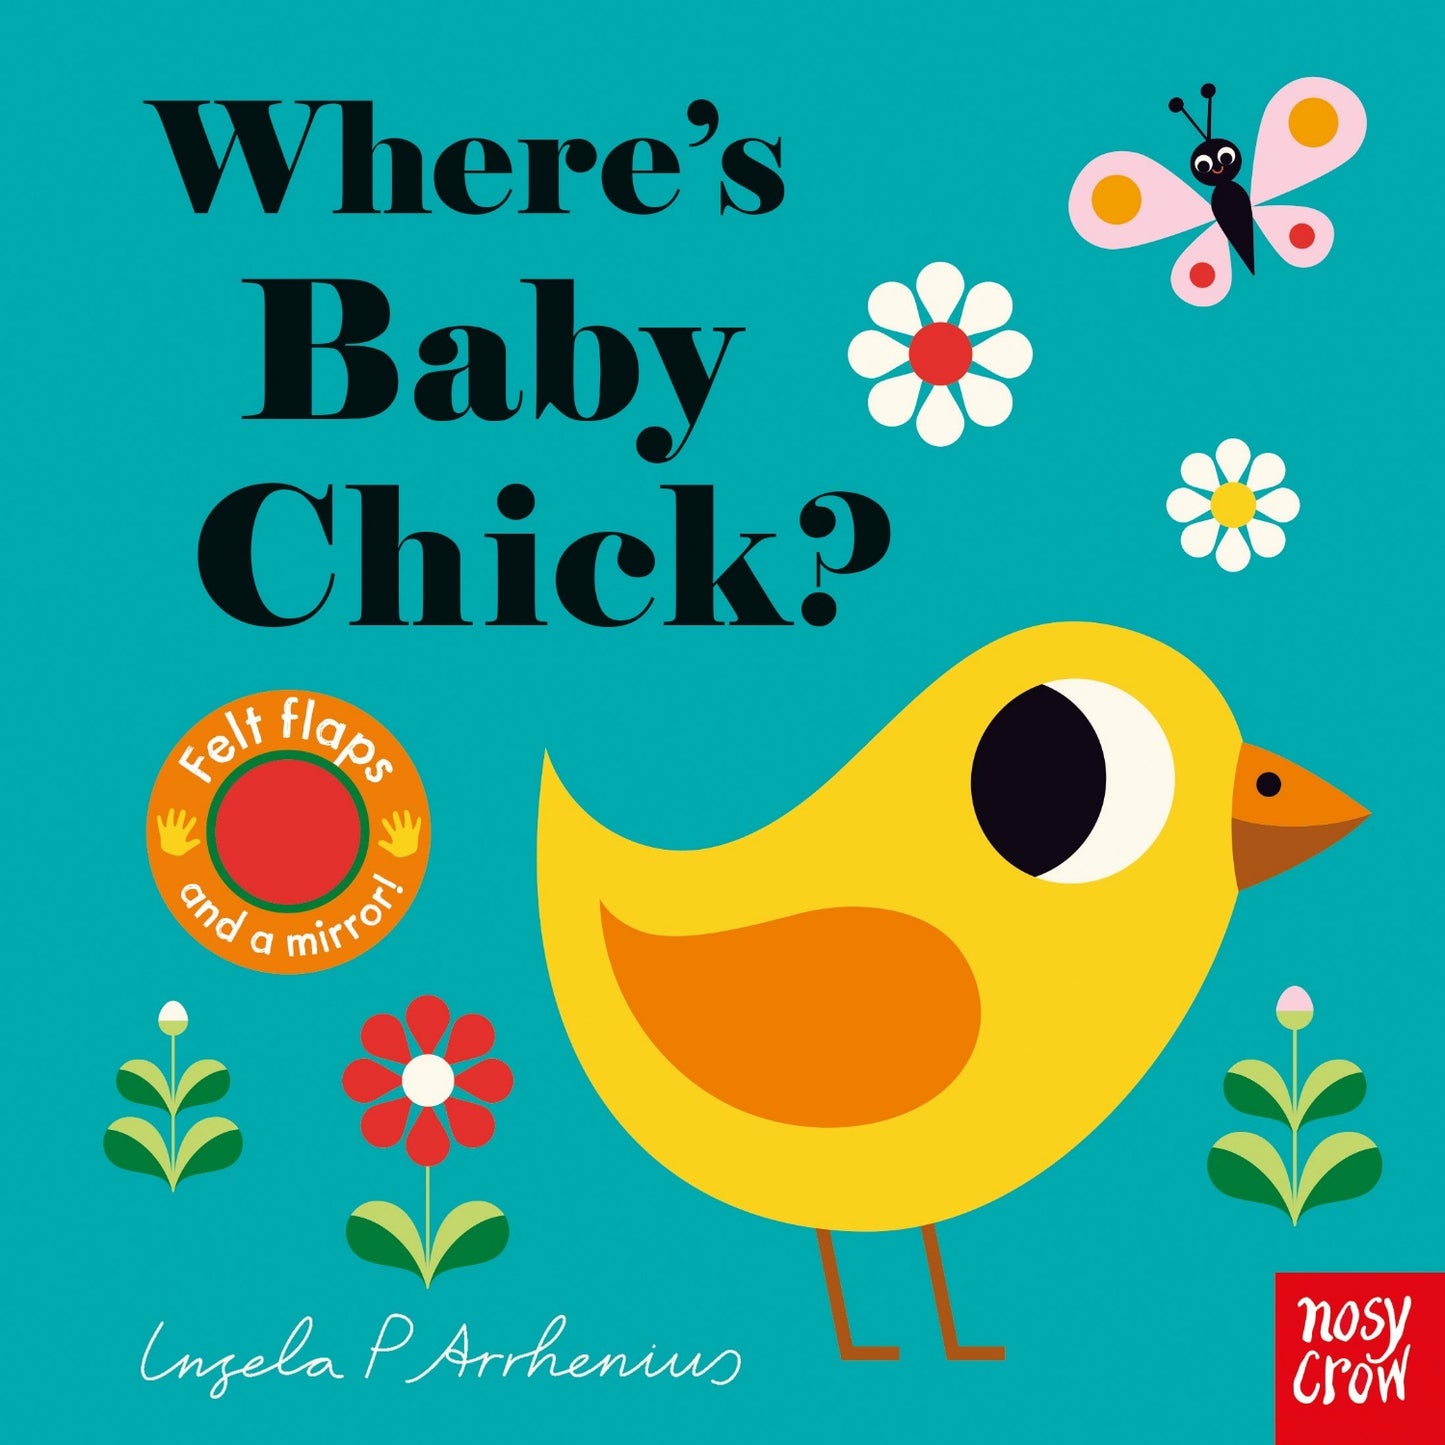 Where's Baby Chick? | Felt Flaps Board Book for Babies & Toddlers